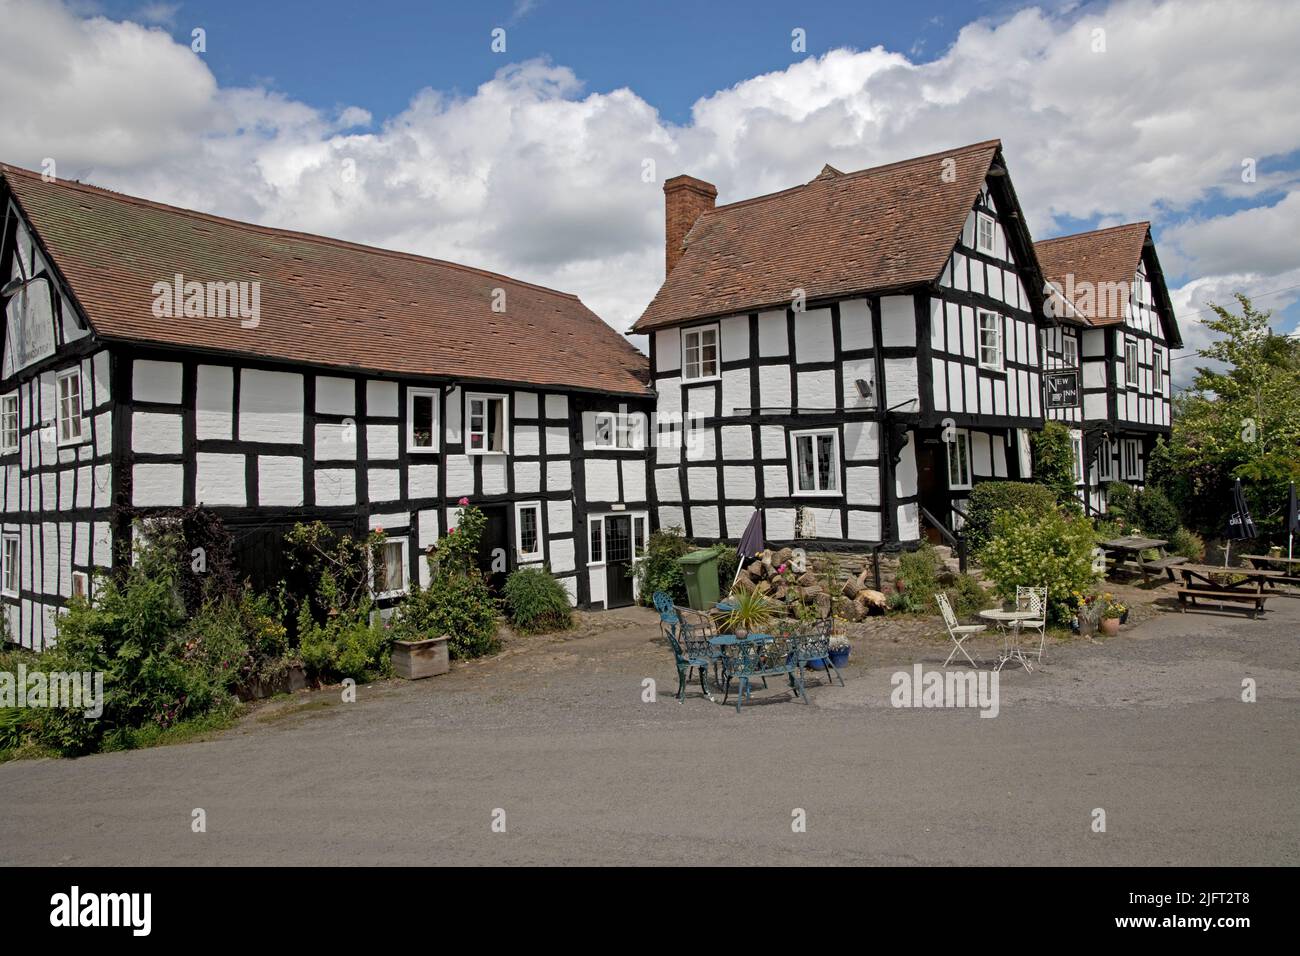 The New Inn is a listed medieaval half-timbered old coaching inn which is now a Public House in Pembridge Herefordshire UK Stock Photo